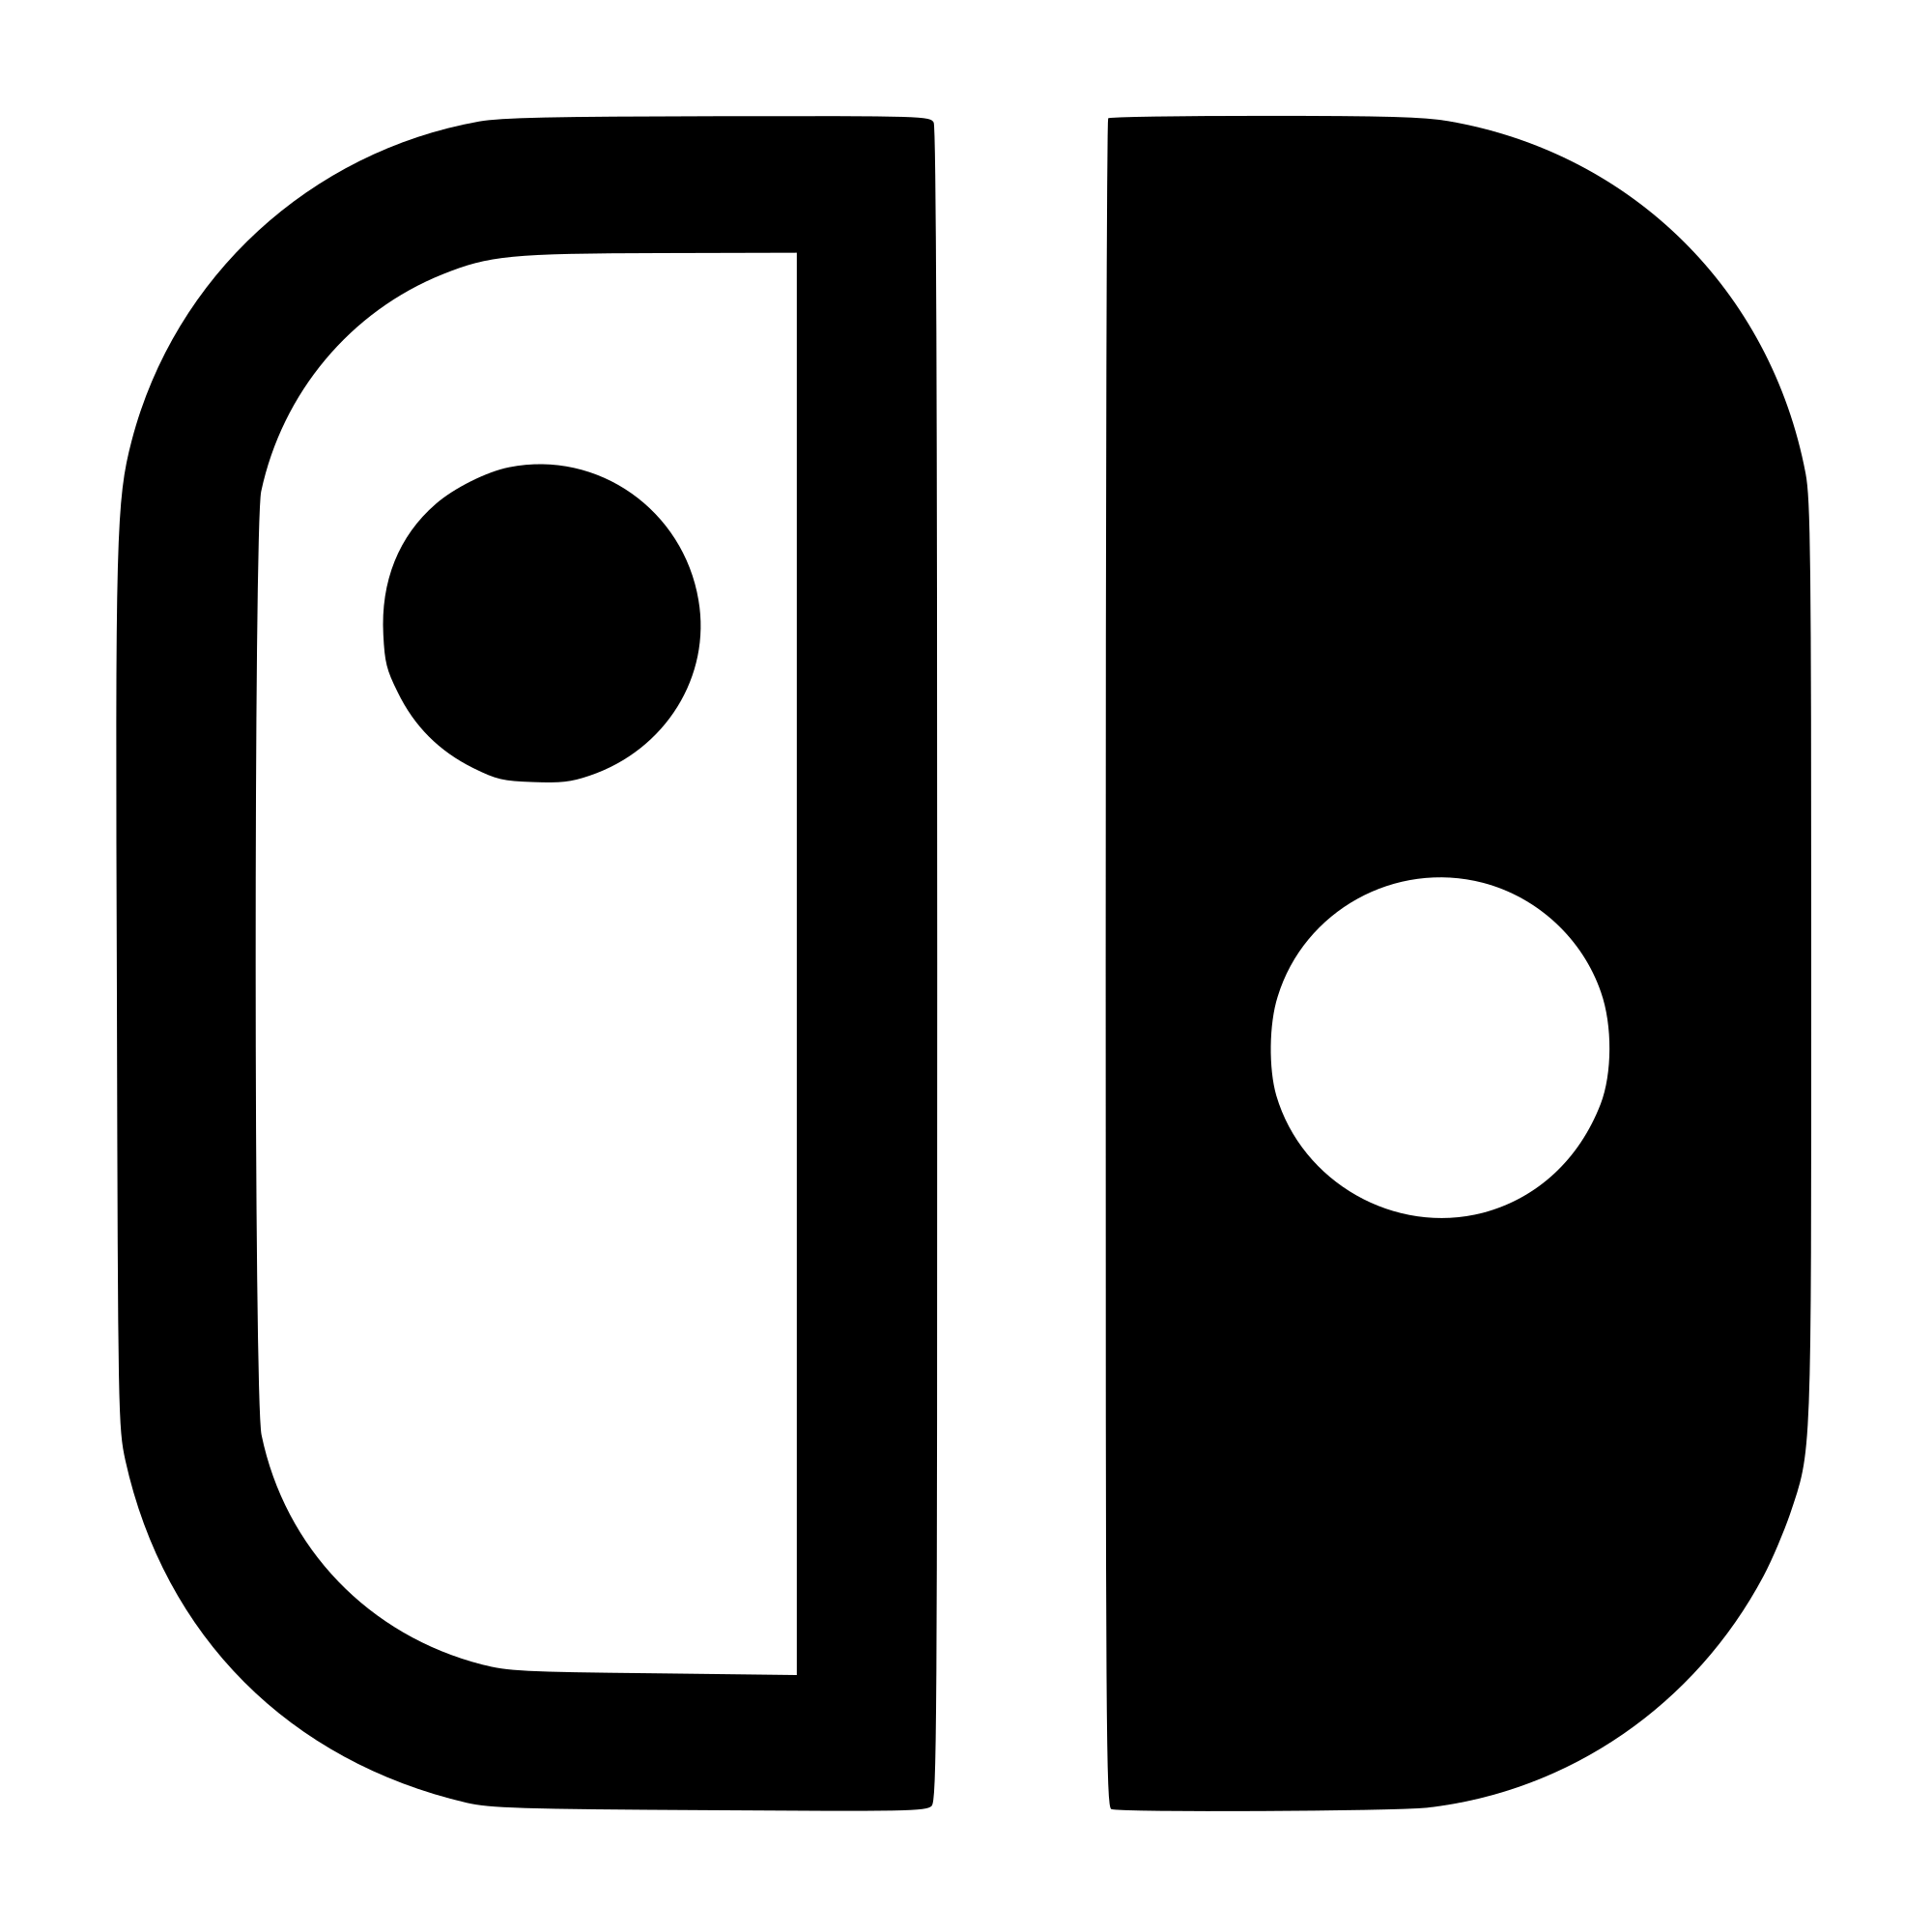 Nintendo Switch Logo - File:Nintendo Switch Logo (without text).svg - Wikimedia Commons